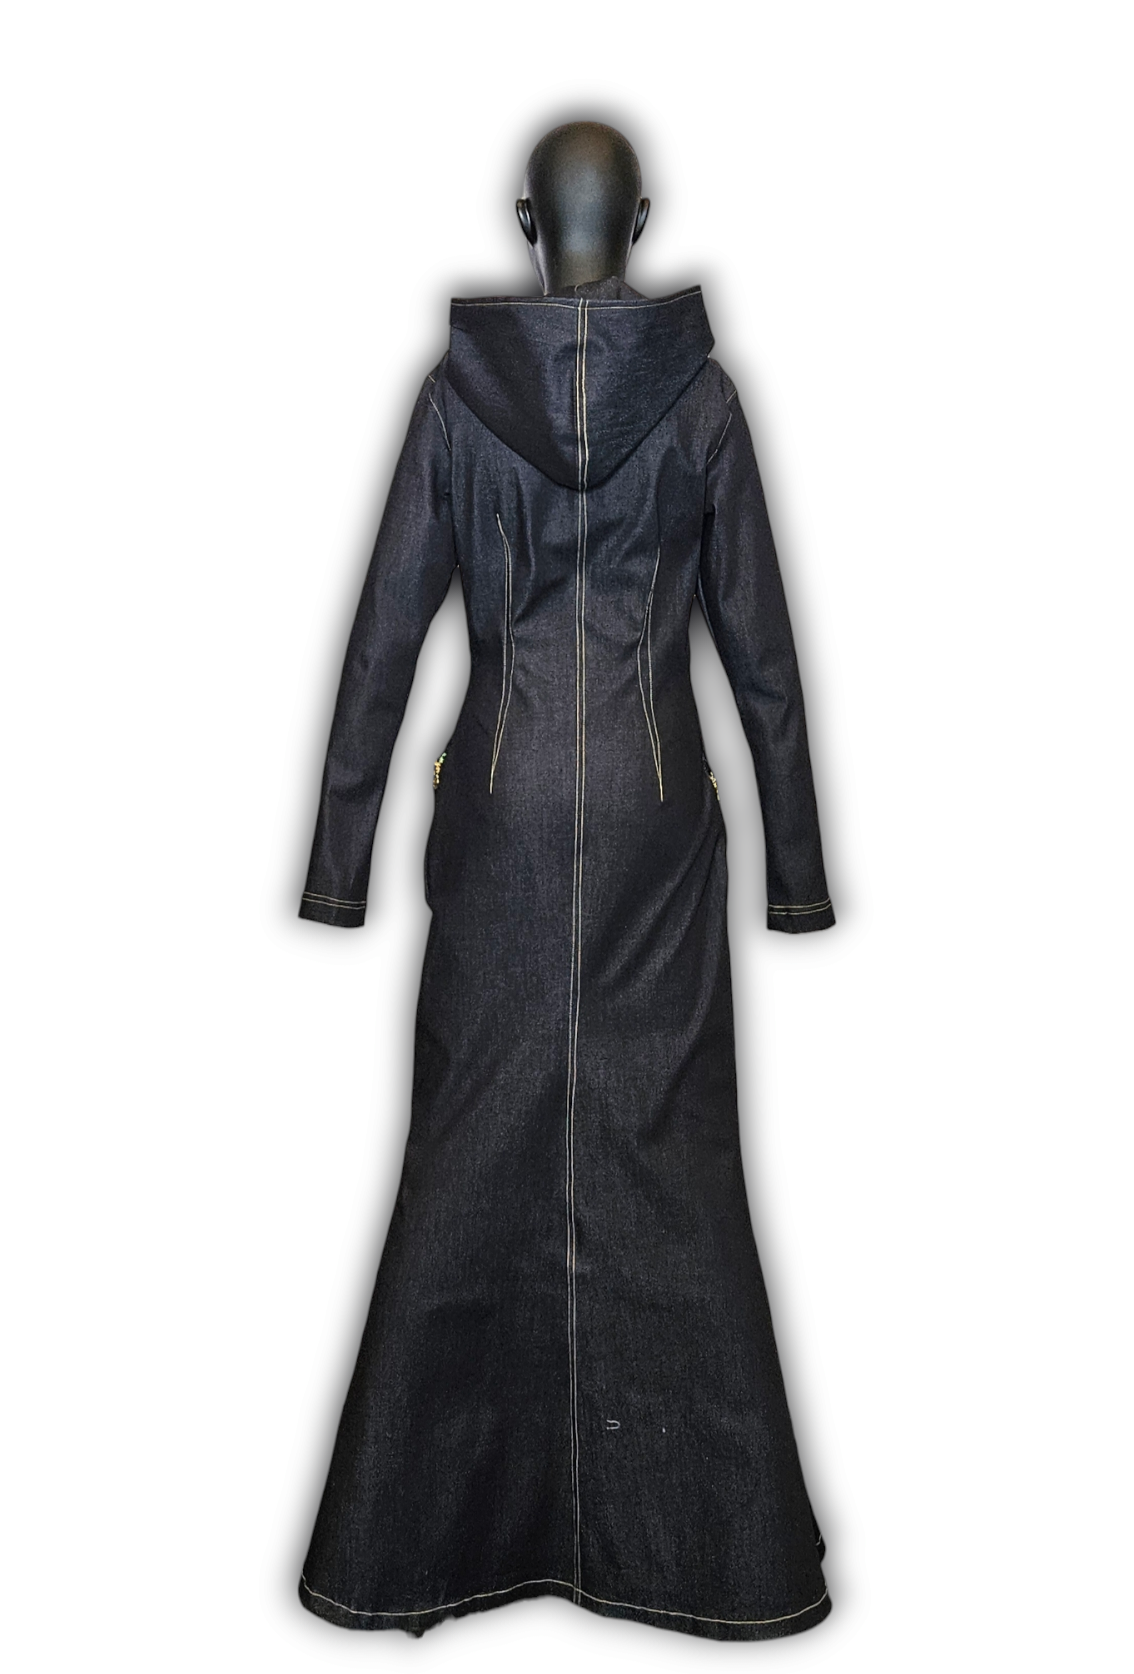 Denim Dress with Hood, and Front Zipper